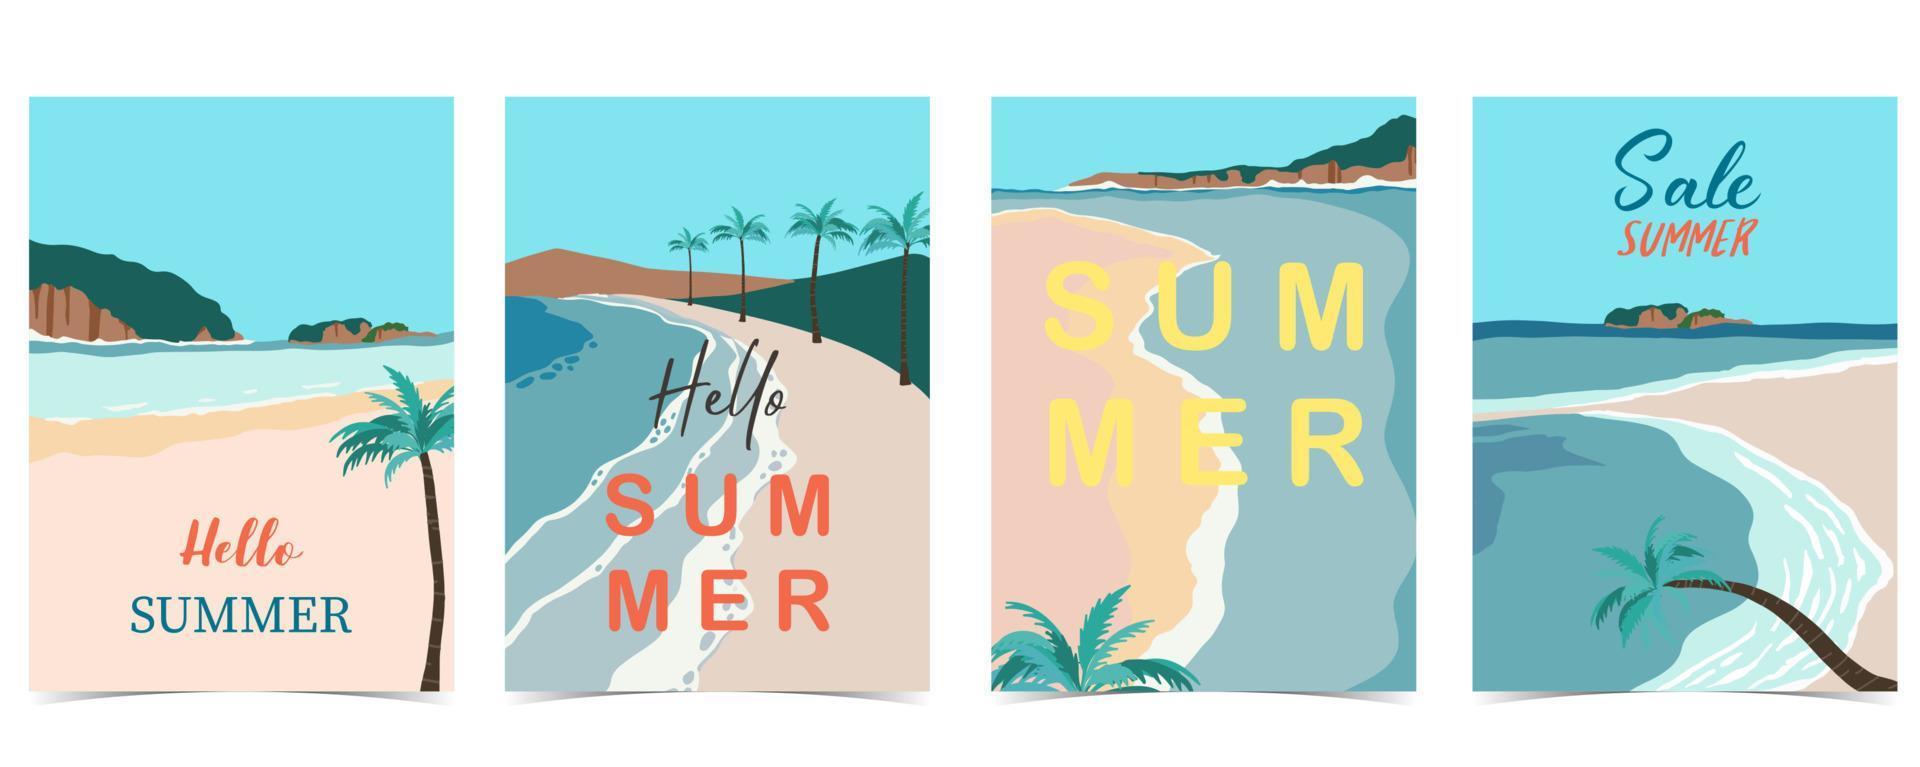 Beach postcard with sun,sea,sky and mountain in the daytime vector